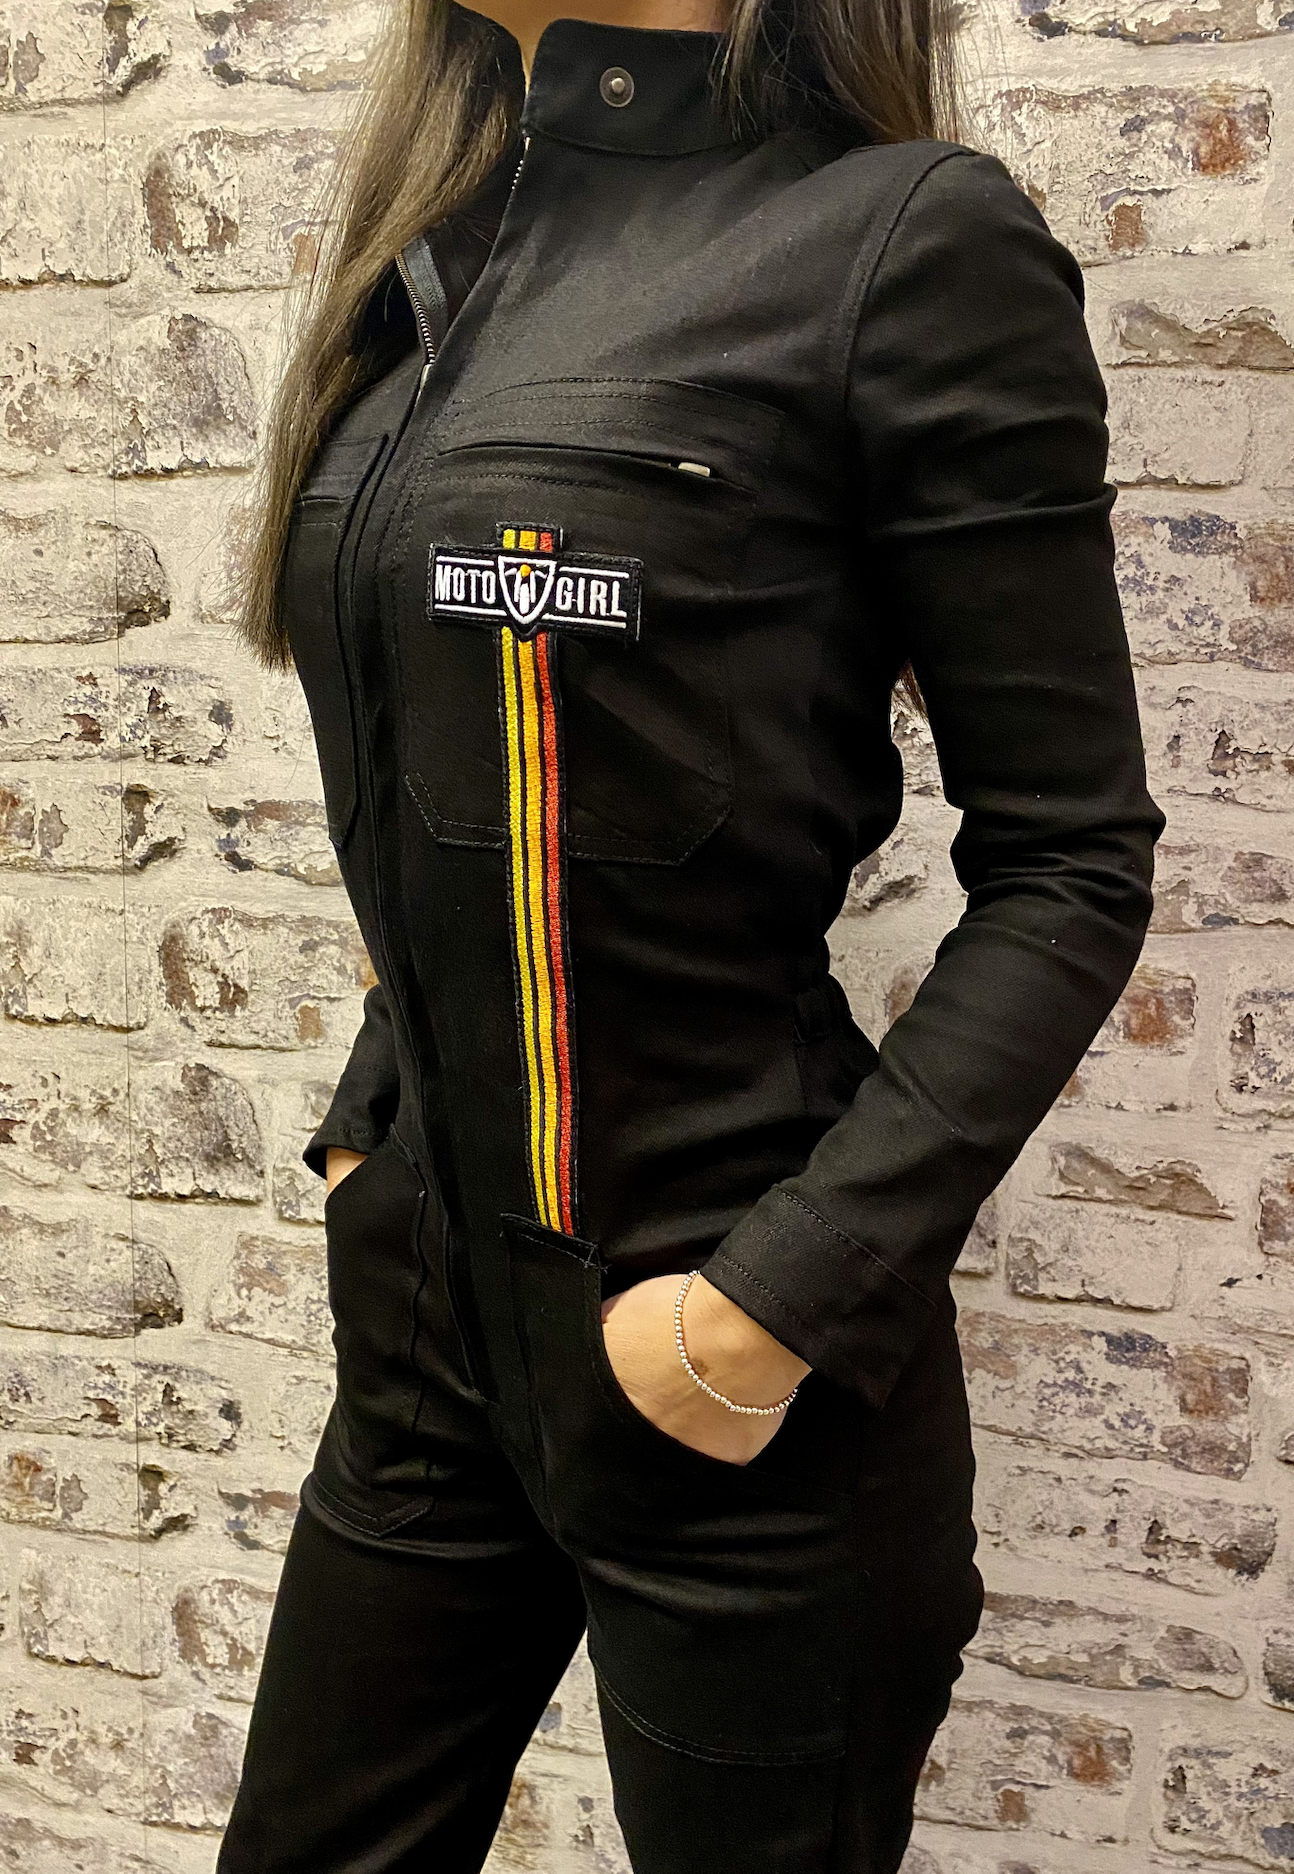 A dark haired woman wearing black garage suit for women from MotoGirl 